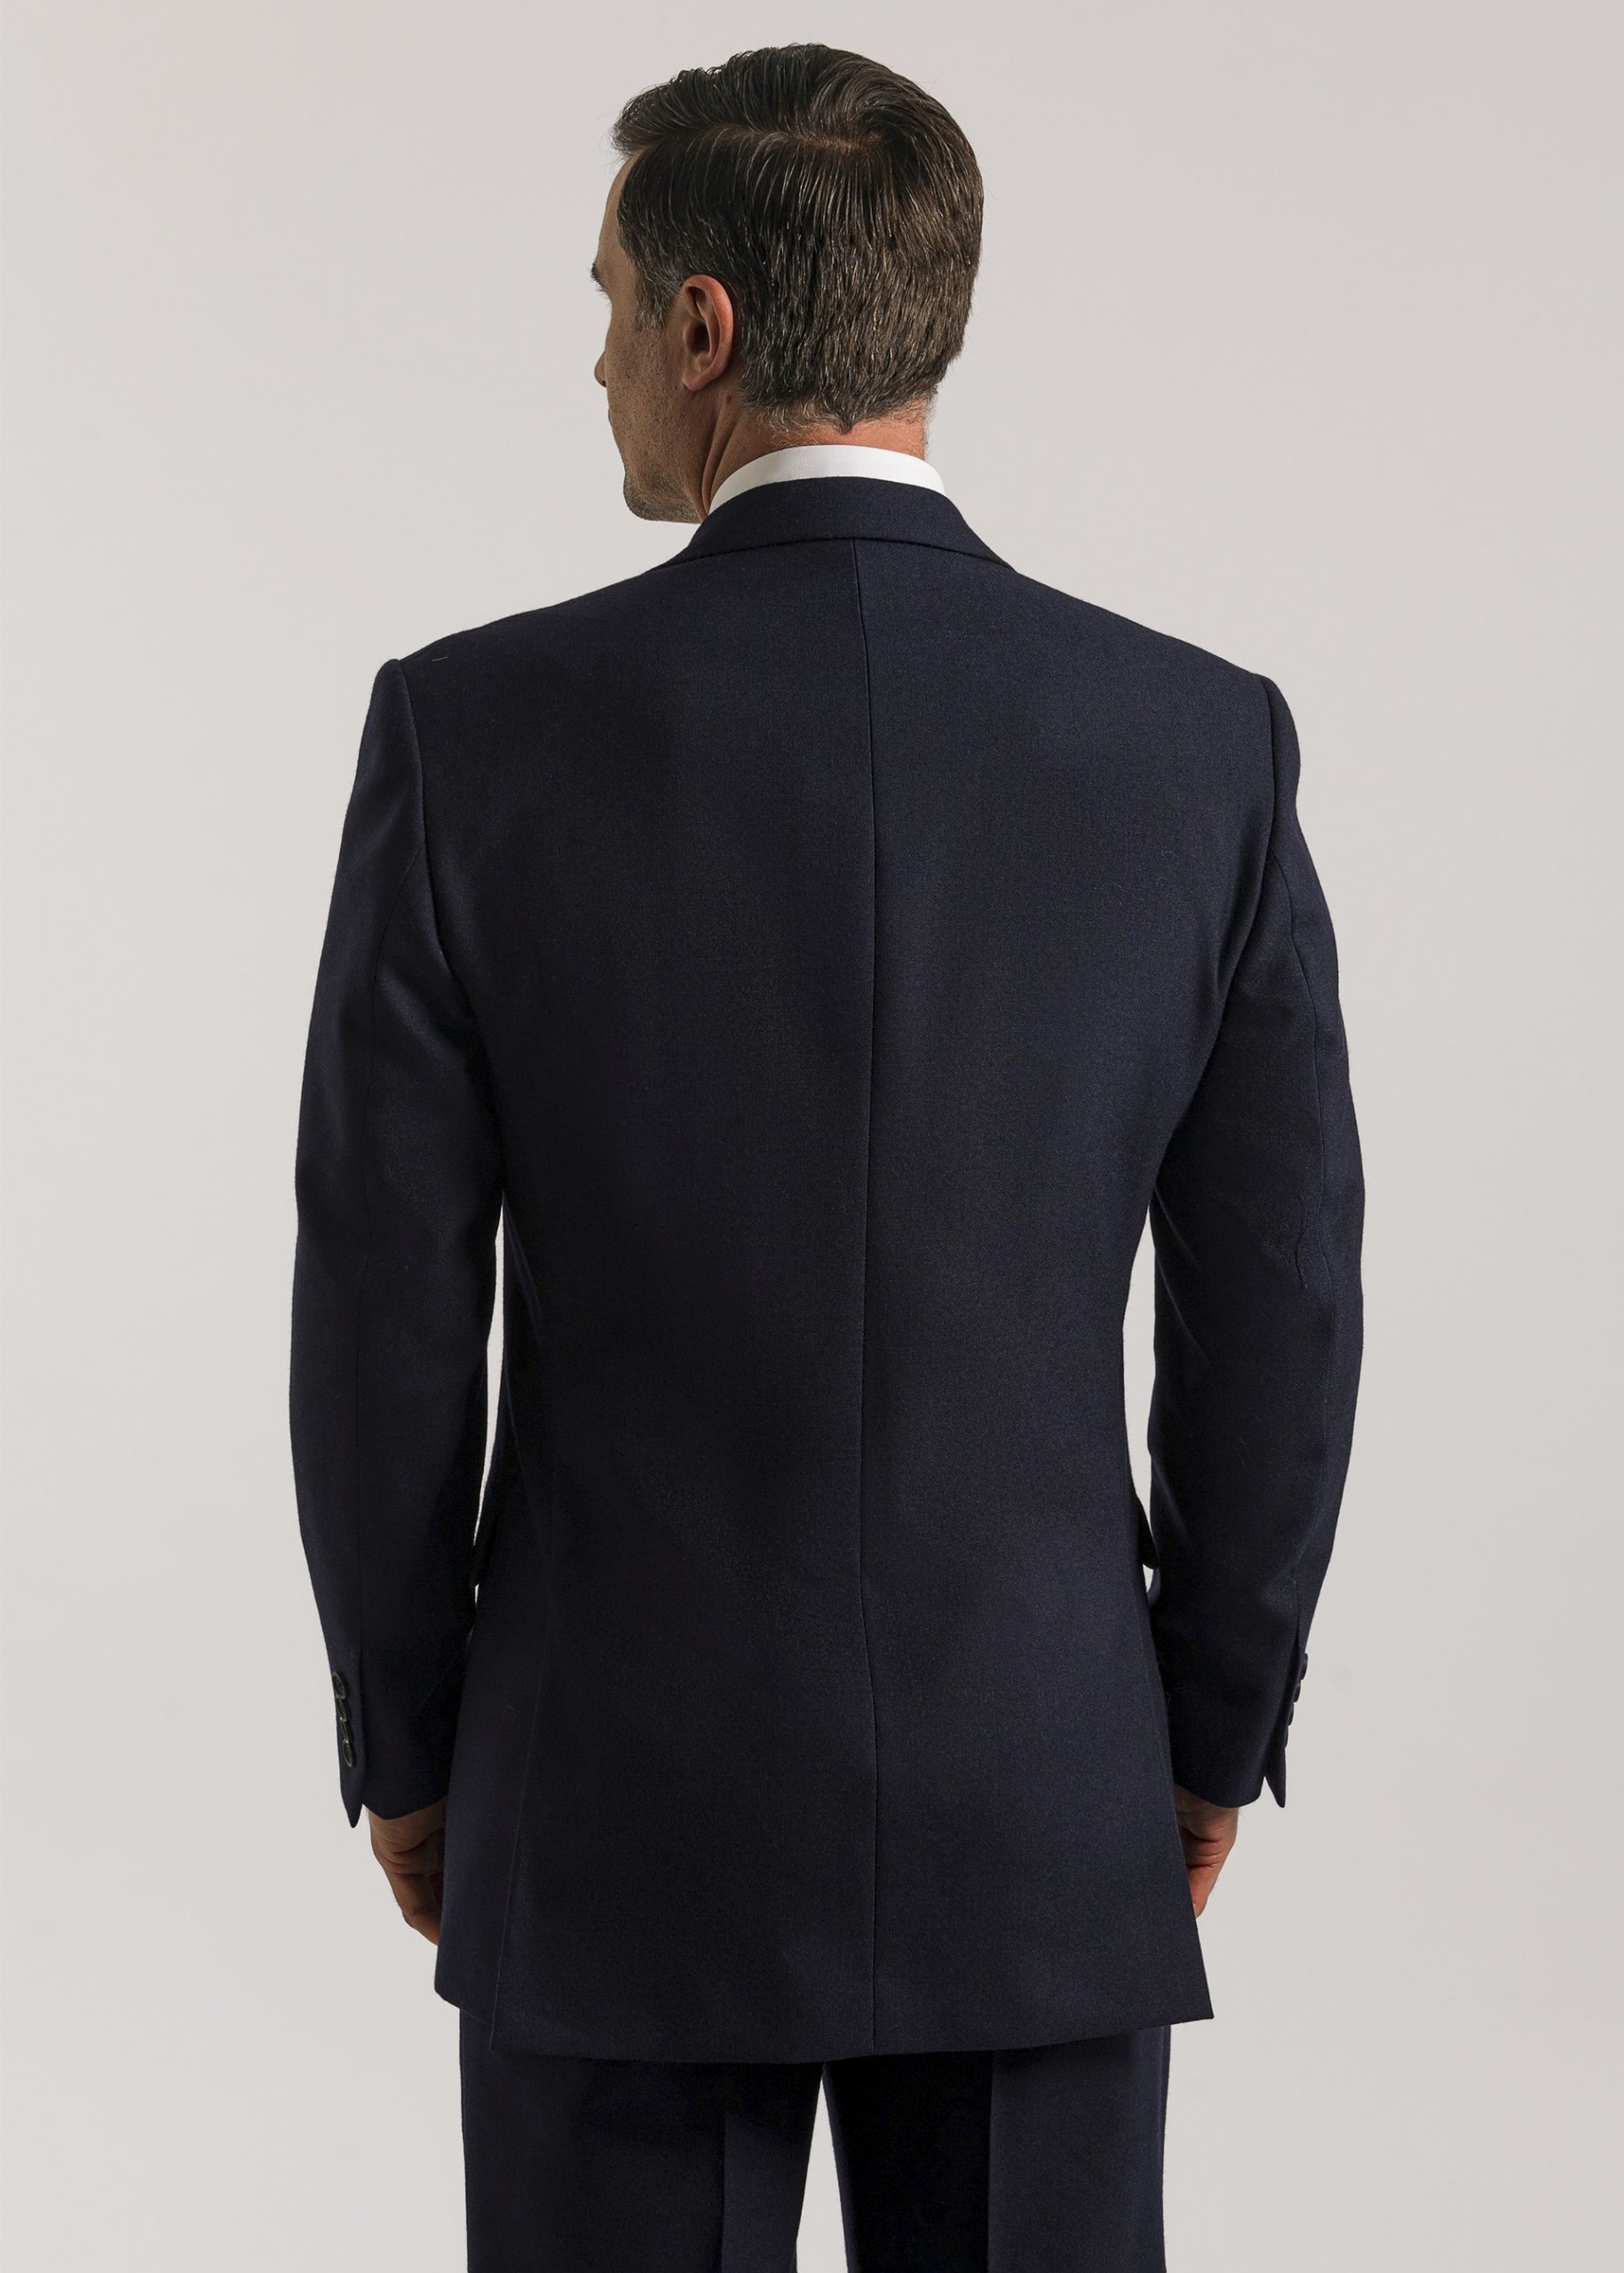 Classic fit navy suit with double breasted detailing